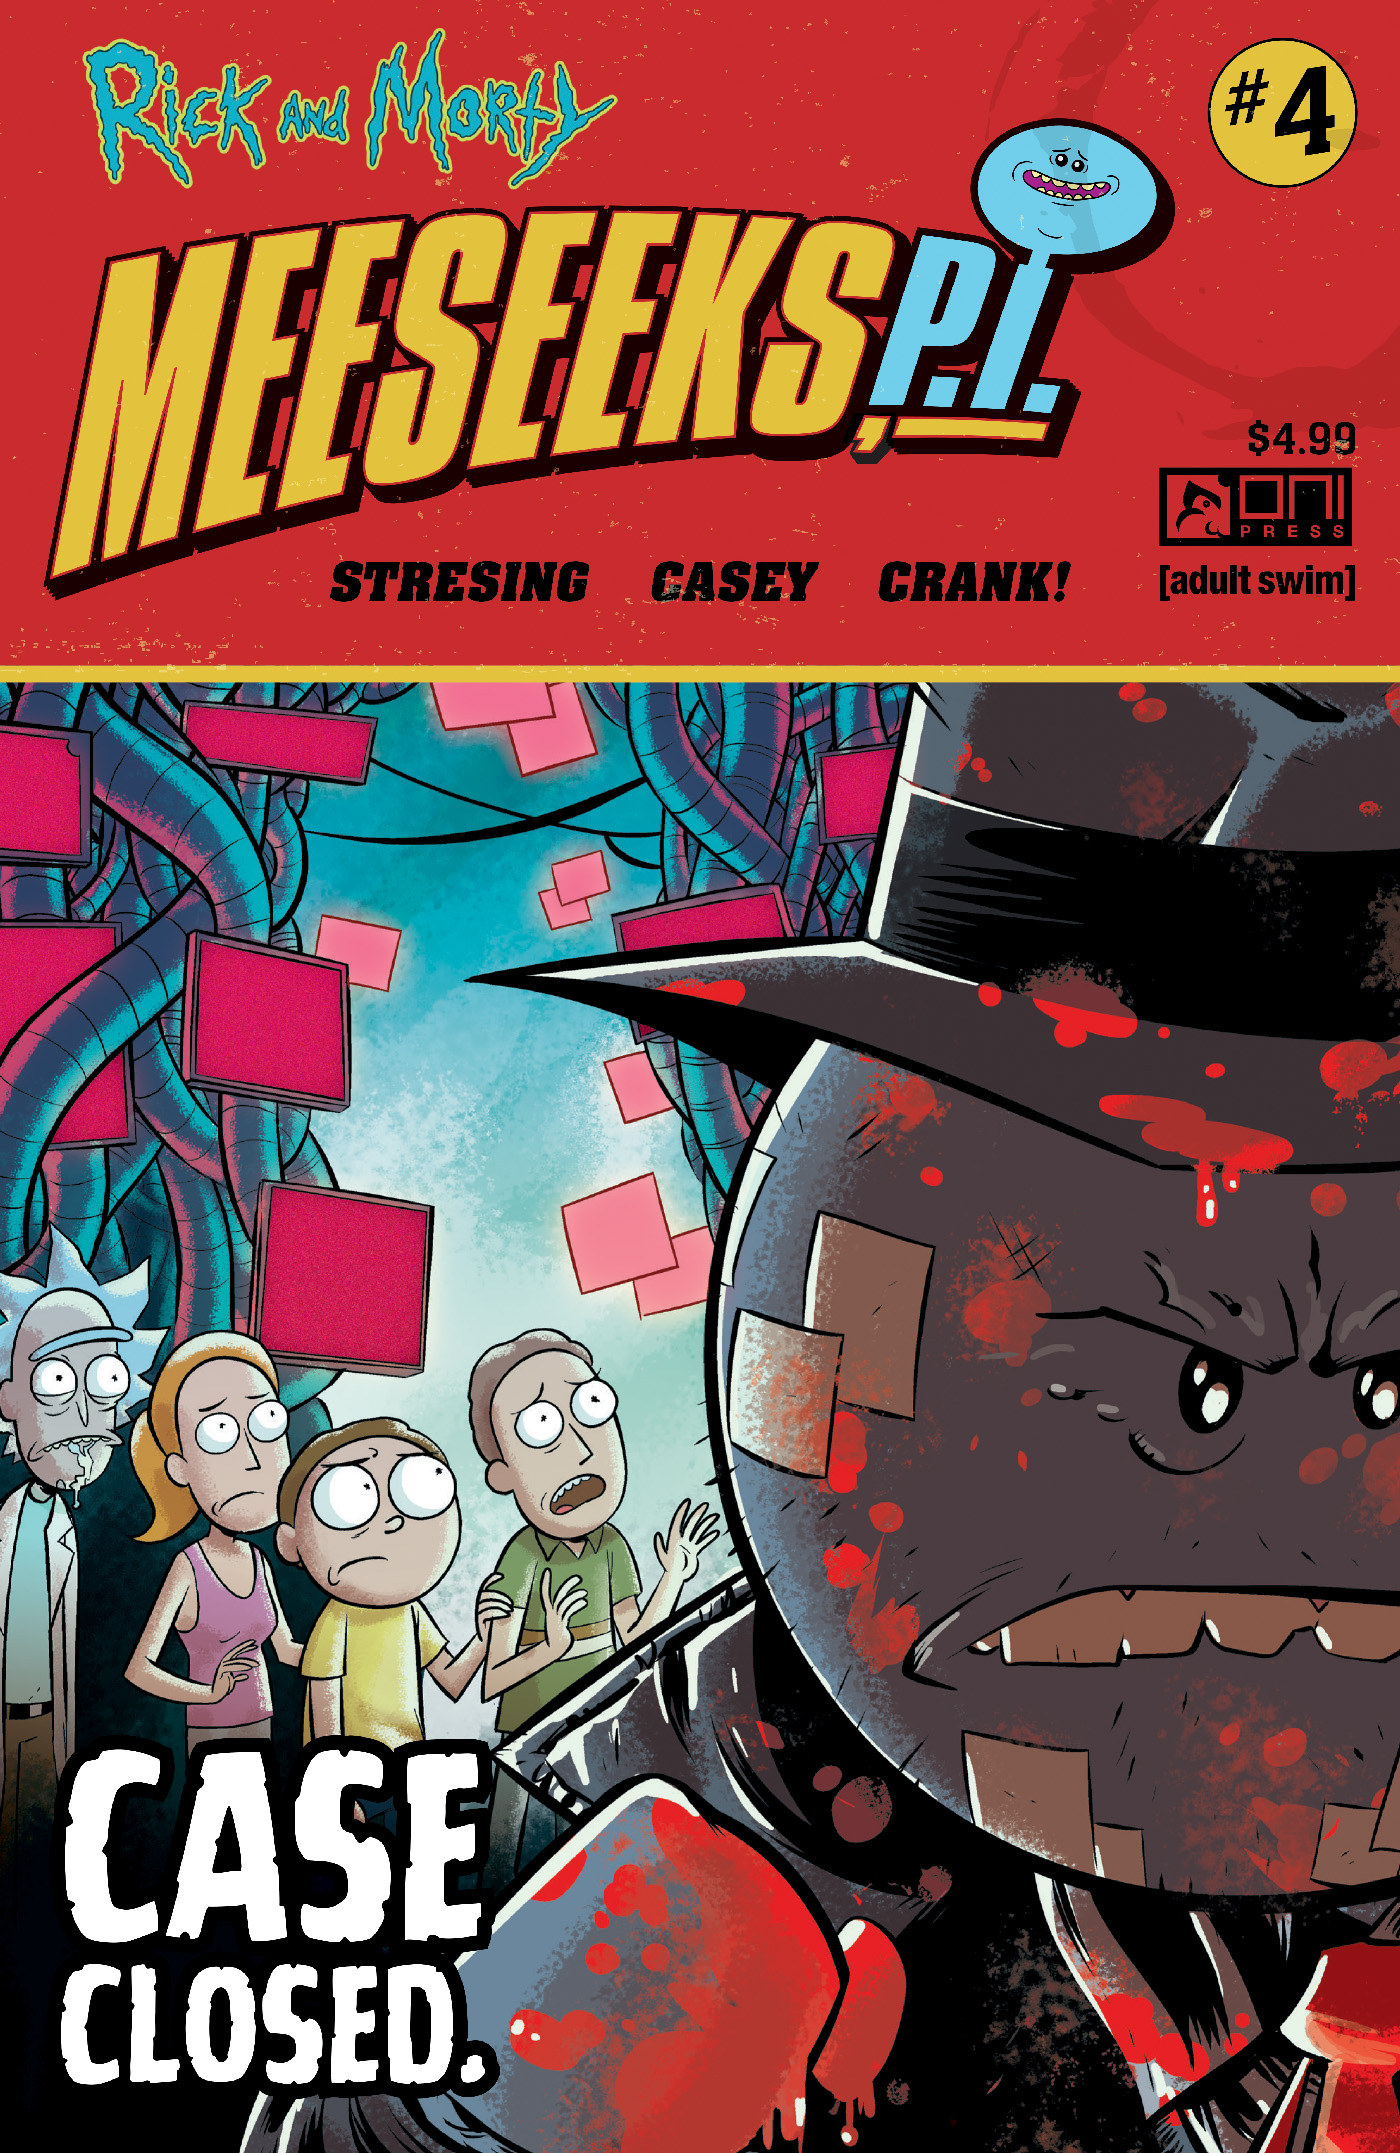 Rick and Morty Meeseeks P.I. #4 Cover A Fred C Stresing (Mature) (Of 4)